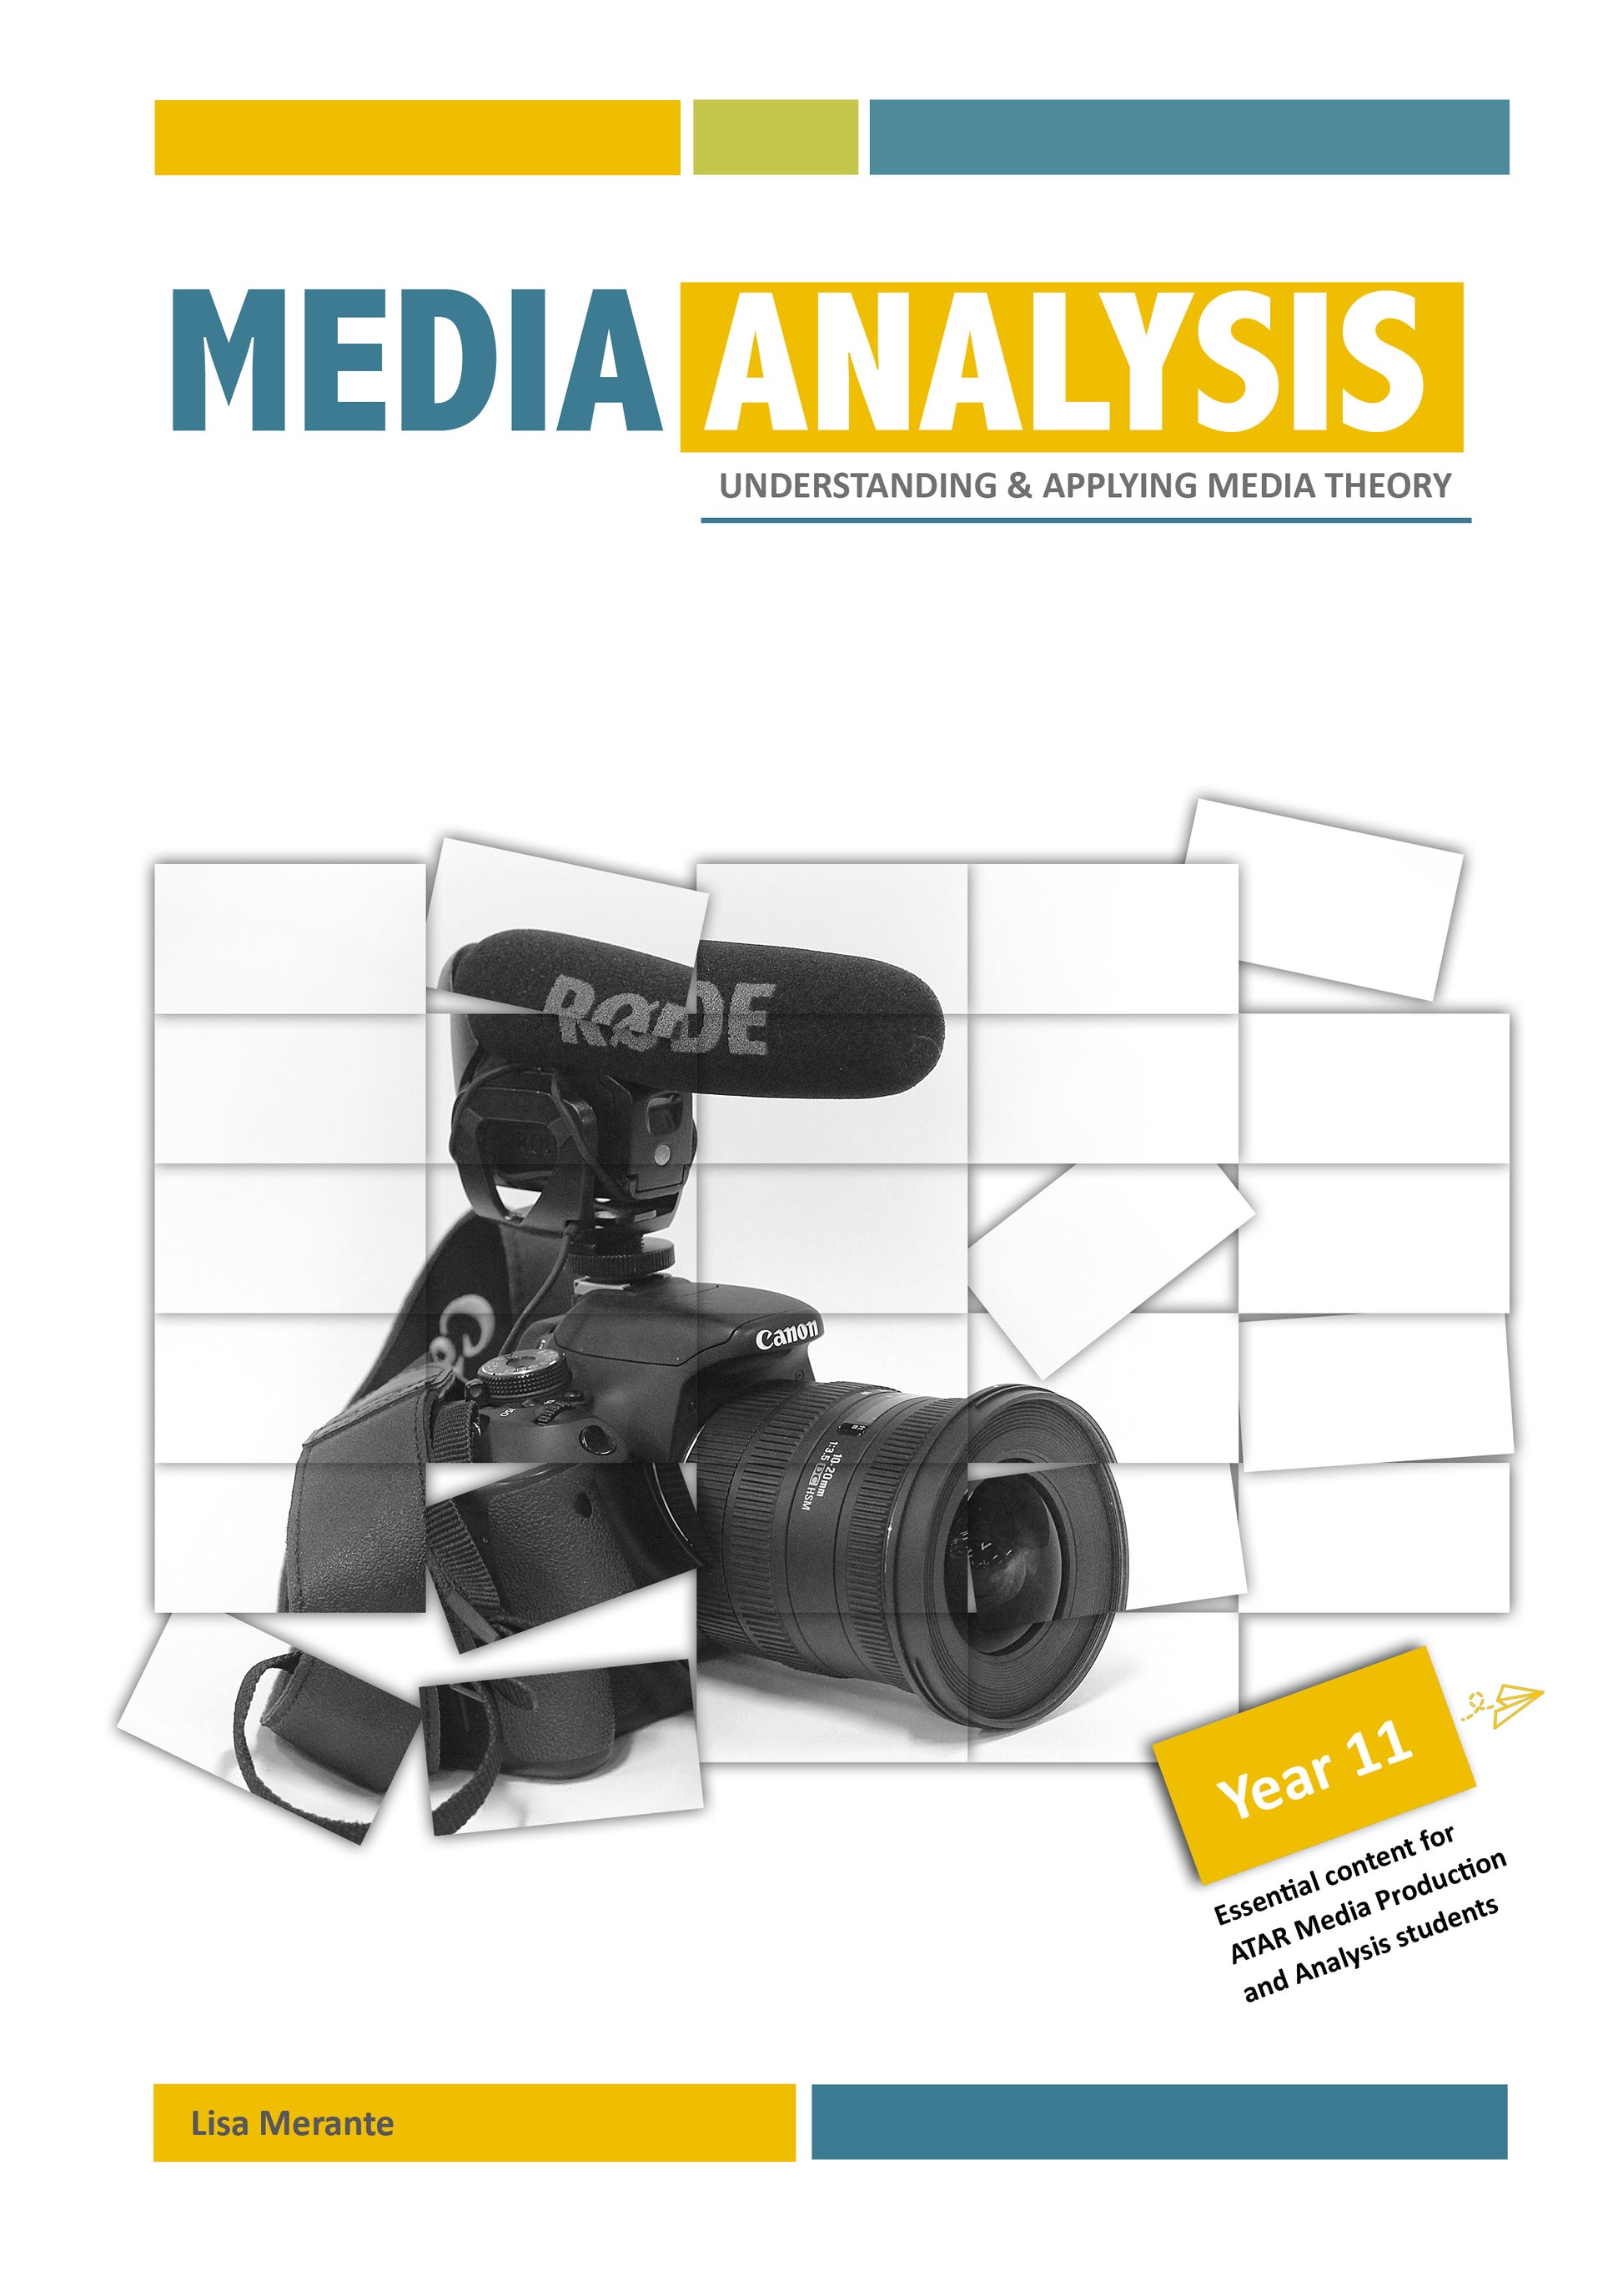 Media Studies textbook. Media Analysis: Understanding and Applying Media theory for Media studies students and teachers.